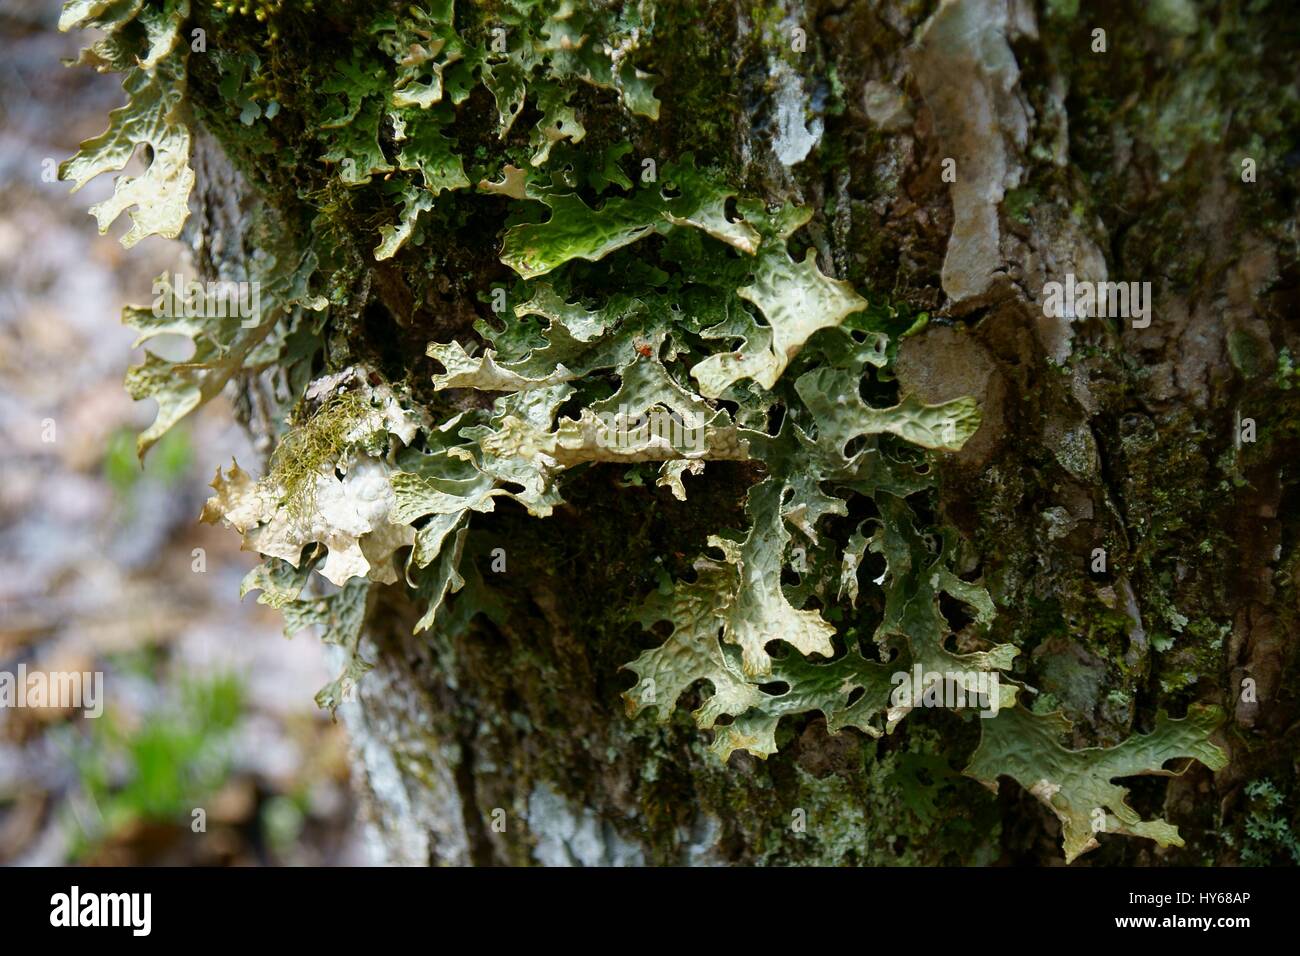 Green lobaria linita (cabbage lungwort) lichen close up on a tree trunk close up Stock Photo